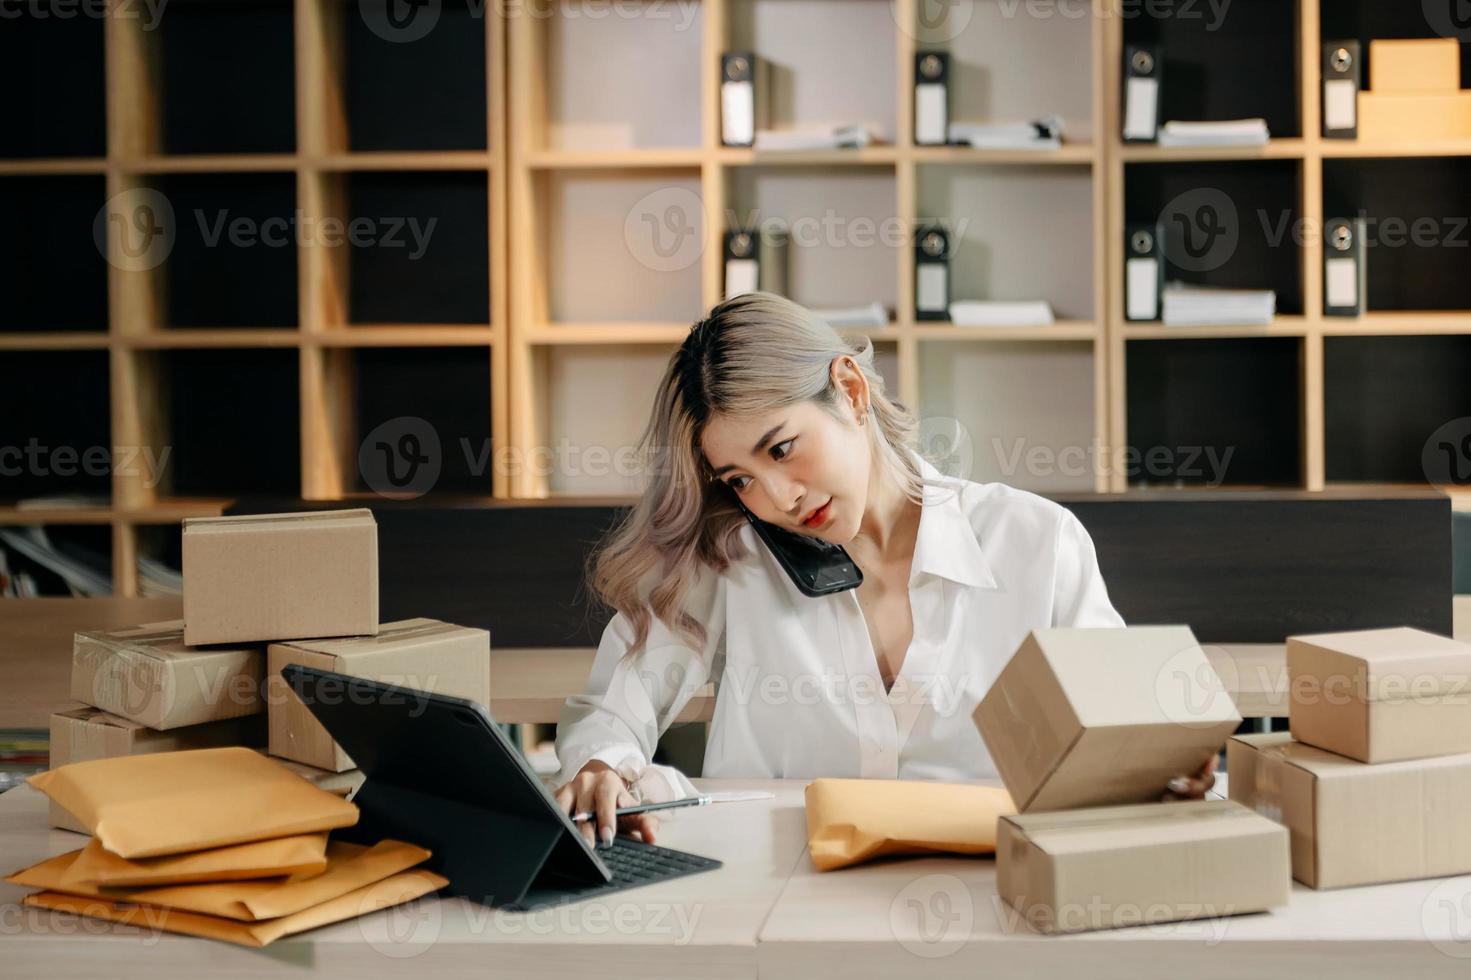 Small business entrepreneur SME freelance woman working at home office, BOX,tablet and laptop online, marketing, packaging, delivery,  e commerce concept photo